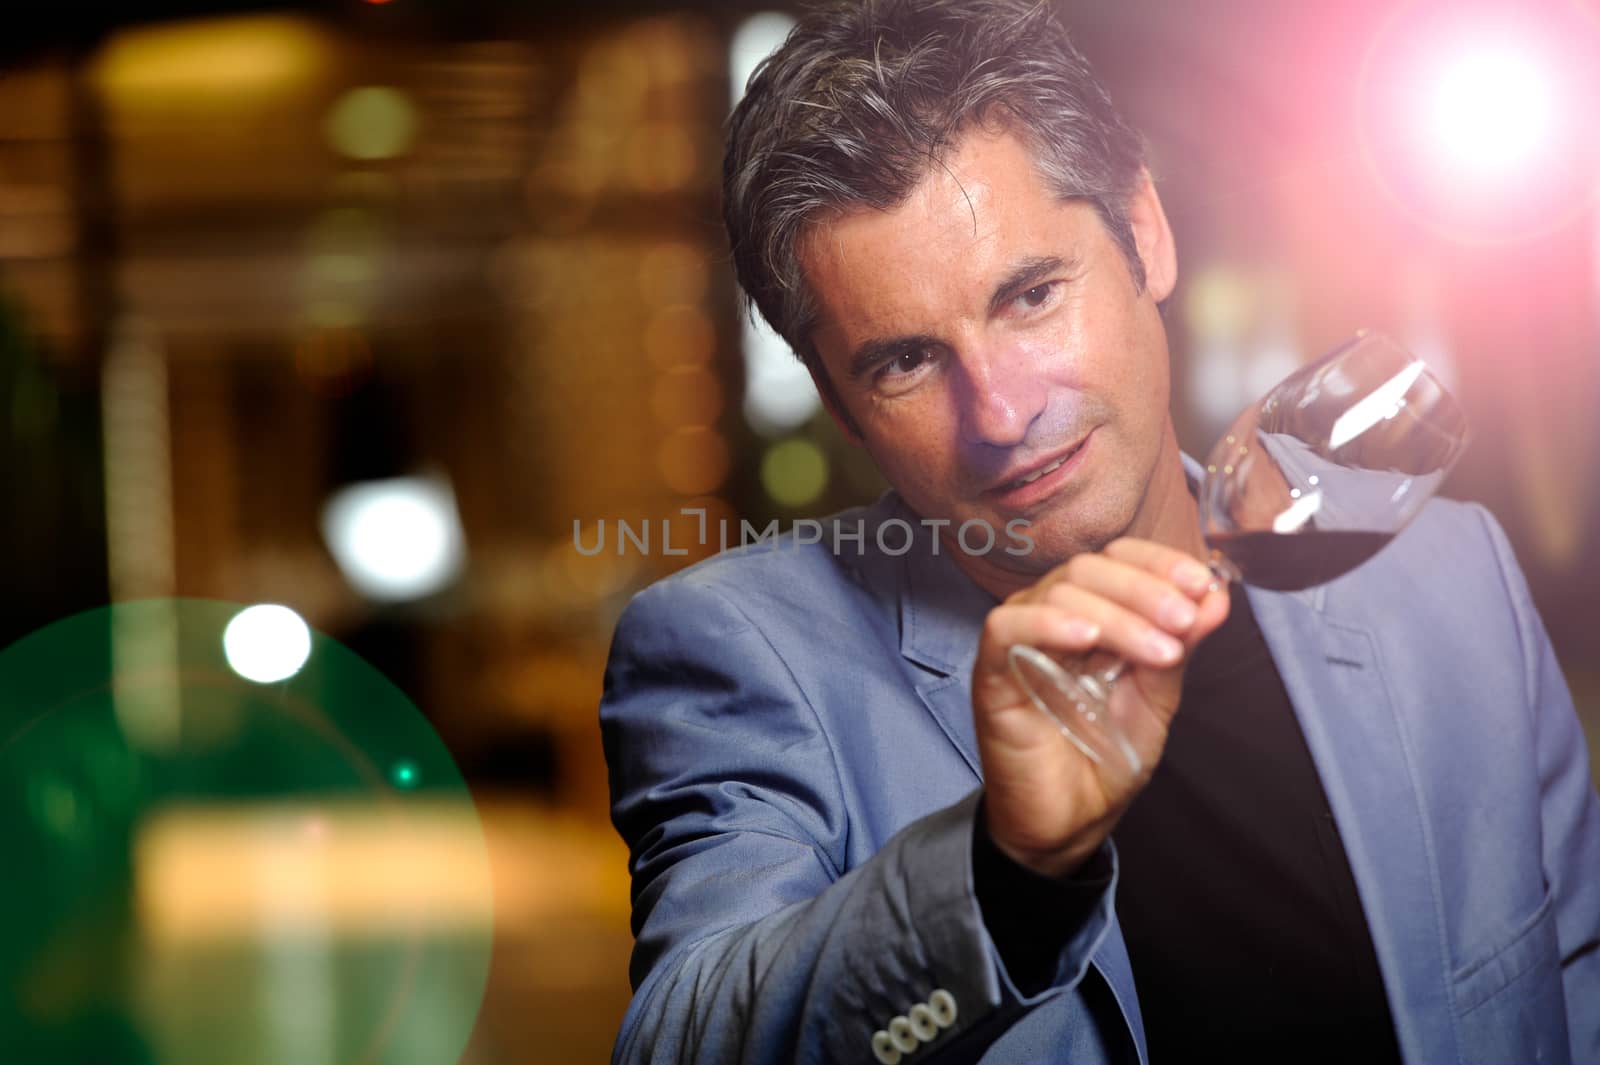 Winegrower in wine-cellar holding glass of wine